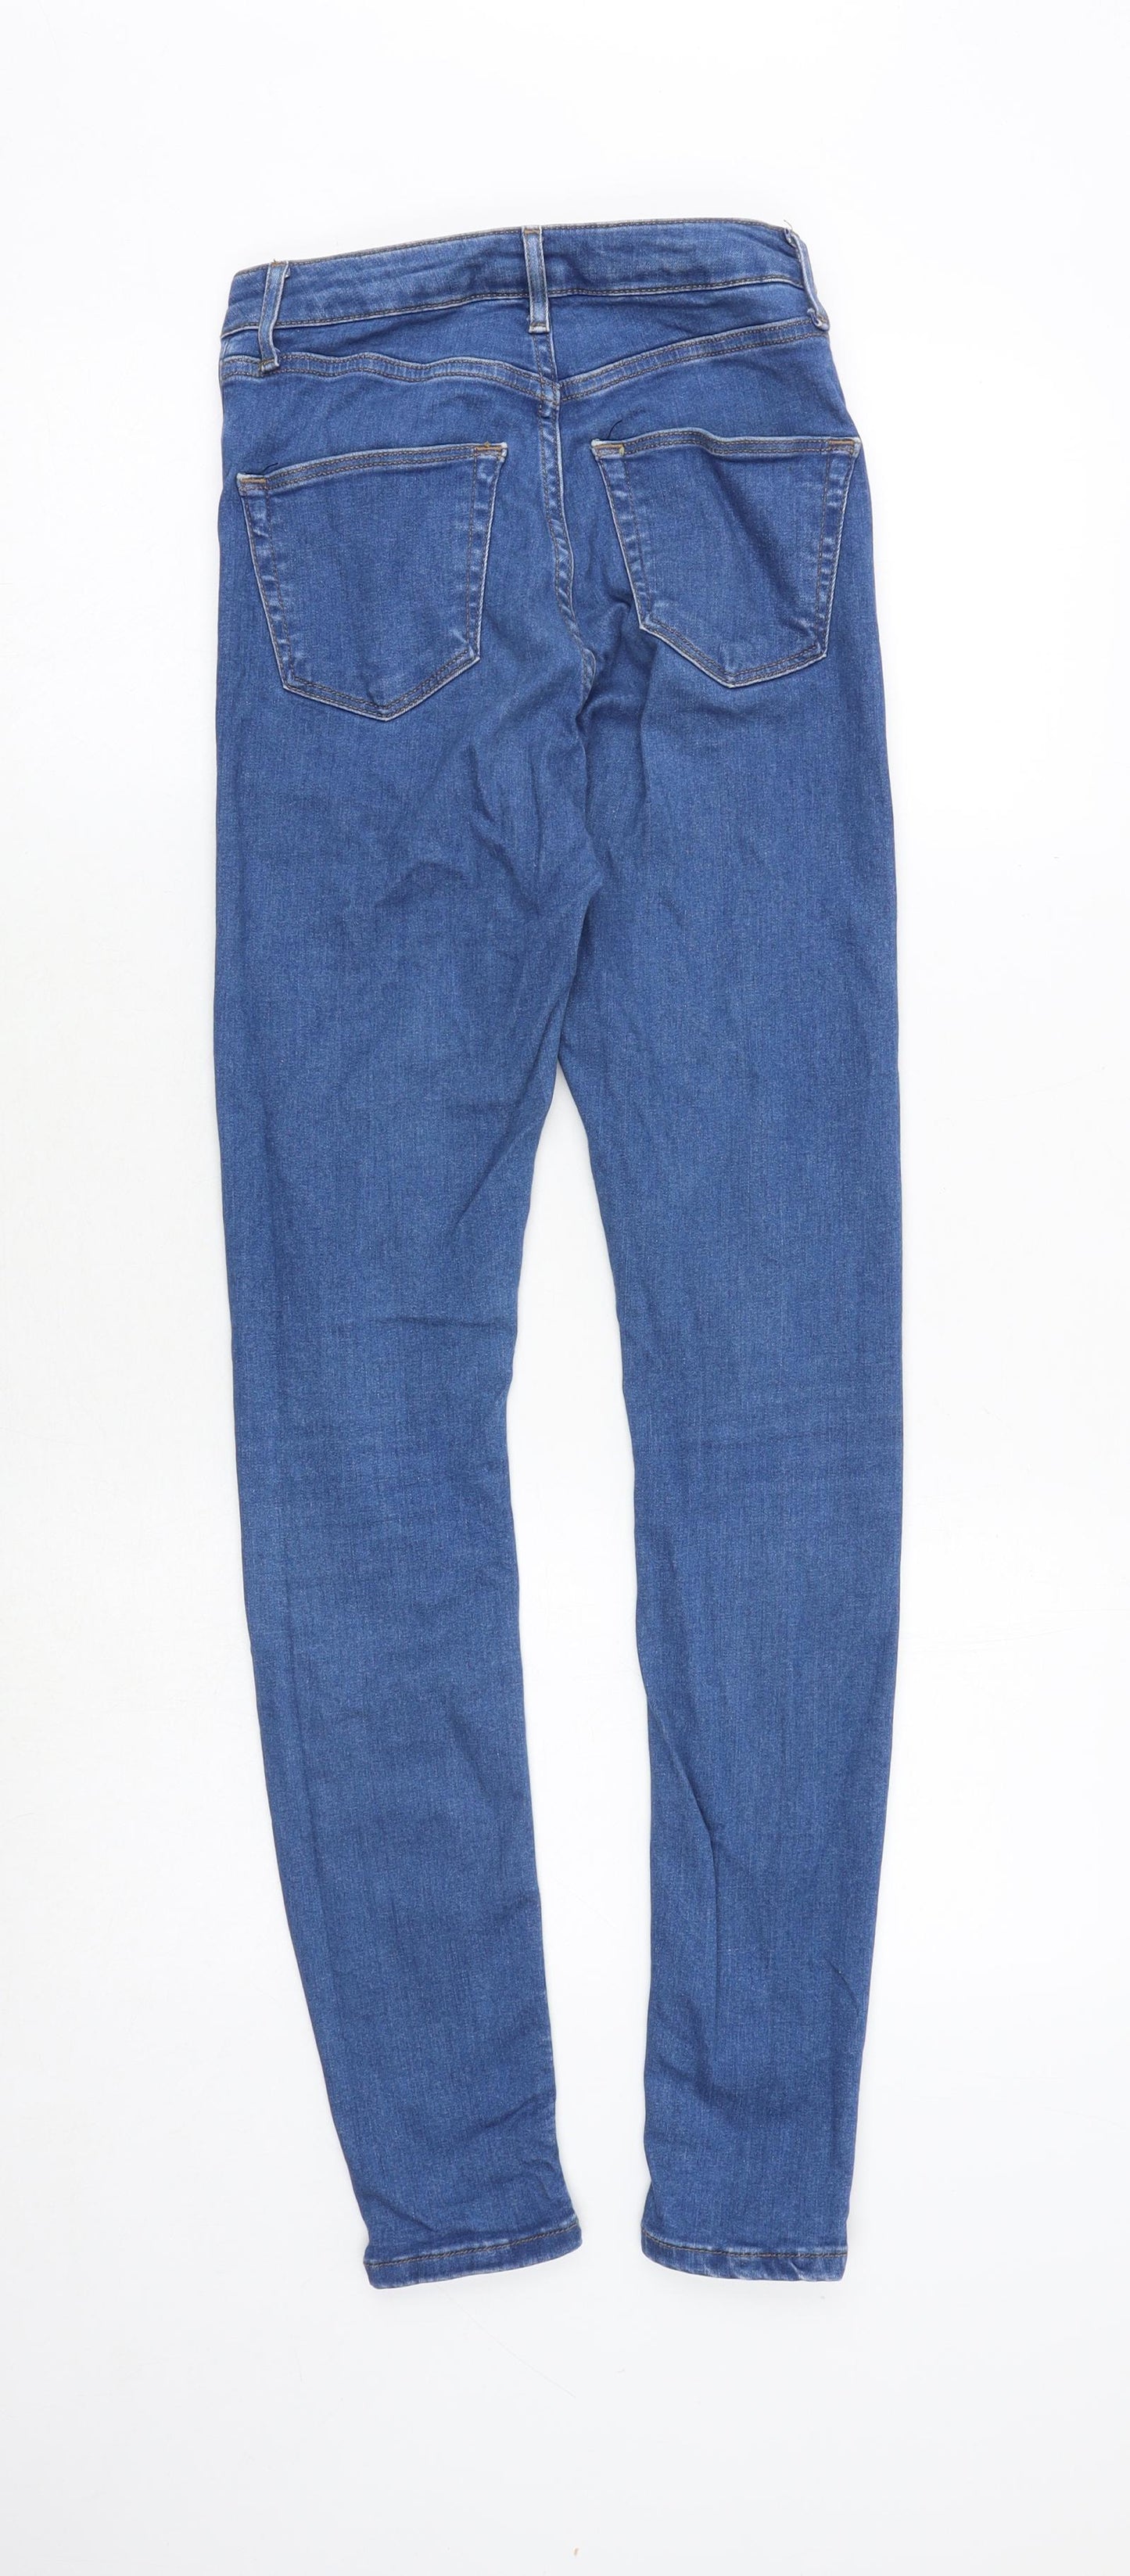 Topshop Womens Blue Cotton Skinny Jeans Size 26 in Regular Zip